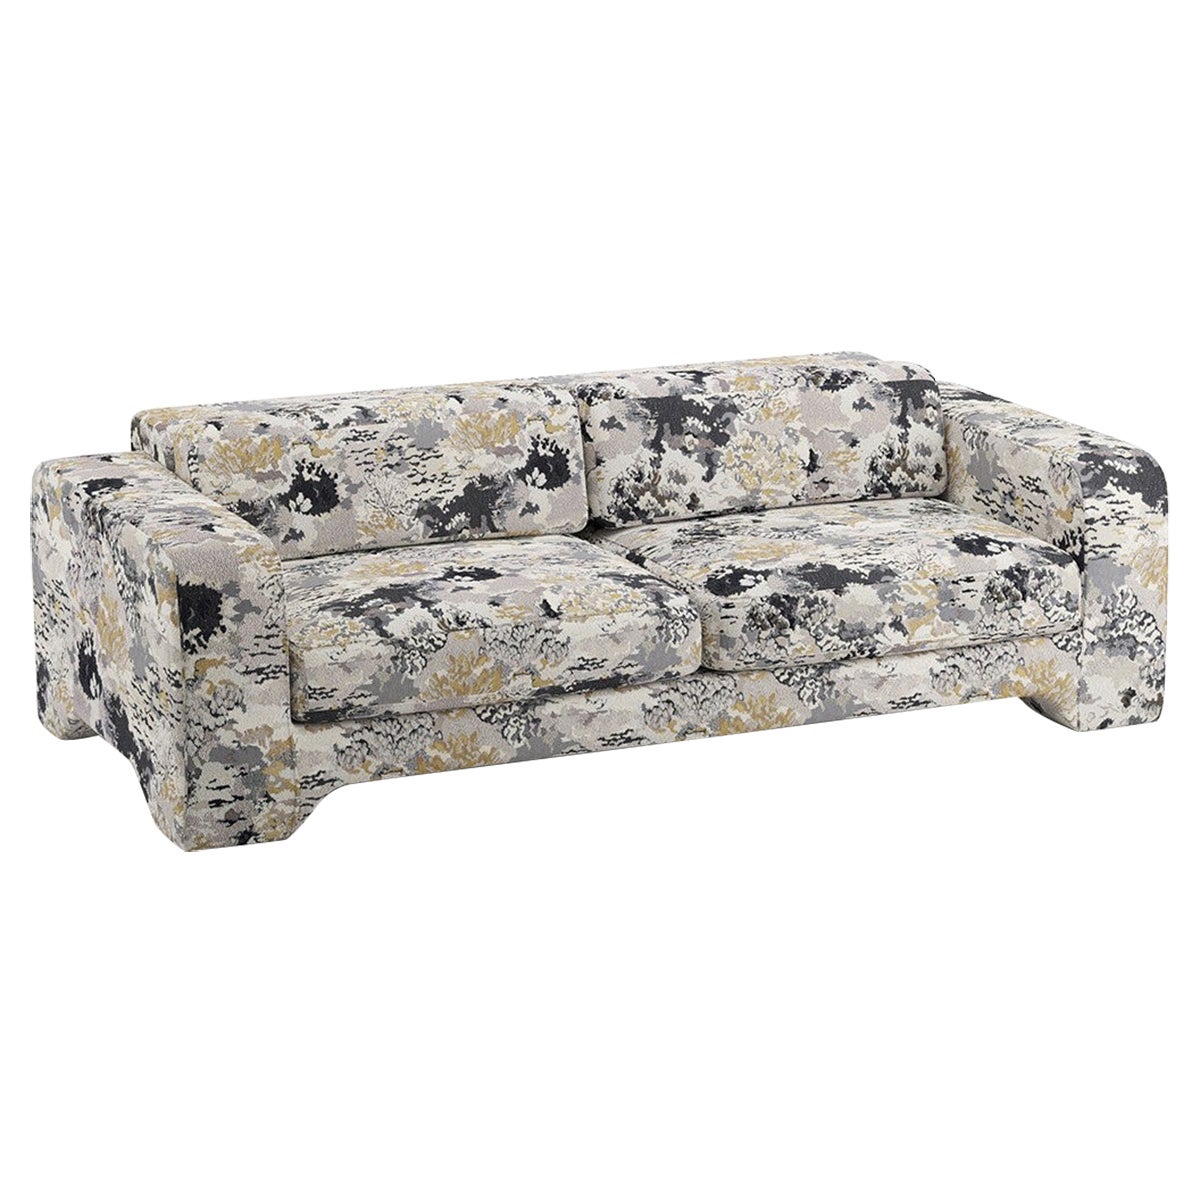 Popus Editions Giovanna 2.5 Seater Sofa in Charcoal Marrakech Jacquard Fabric For Sale